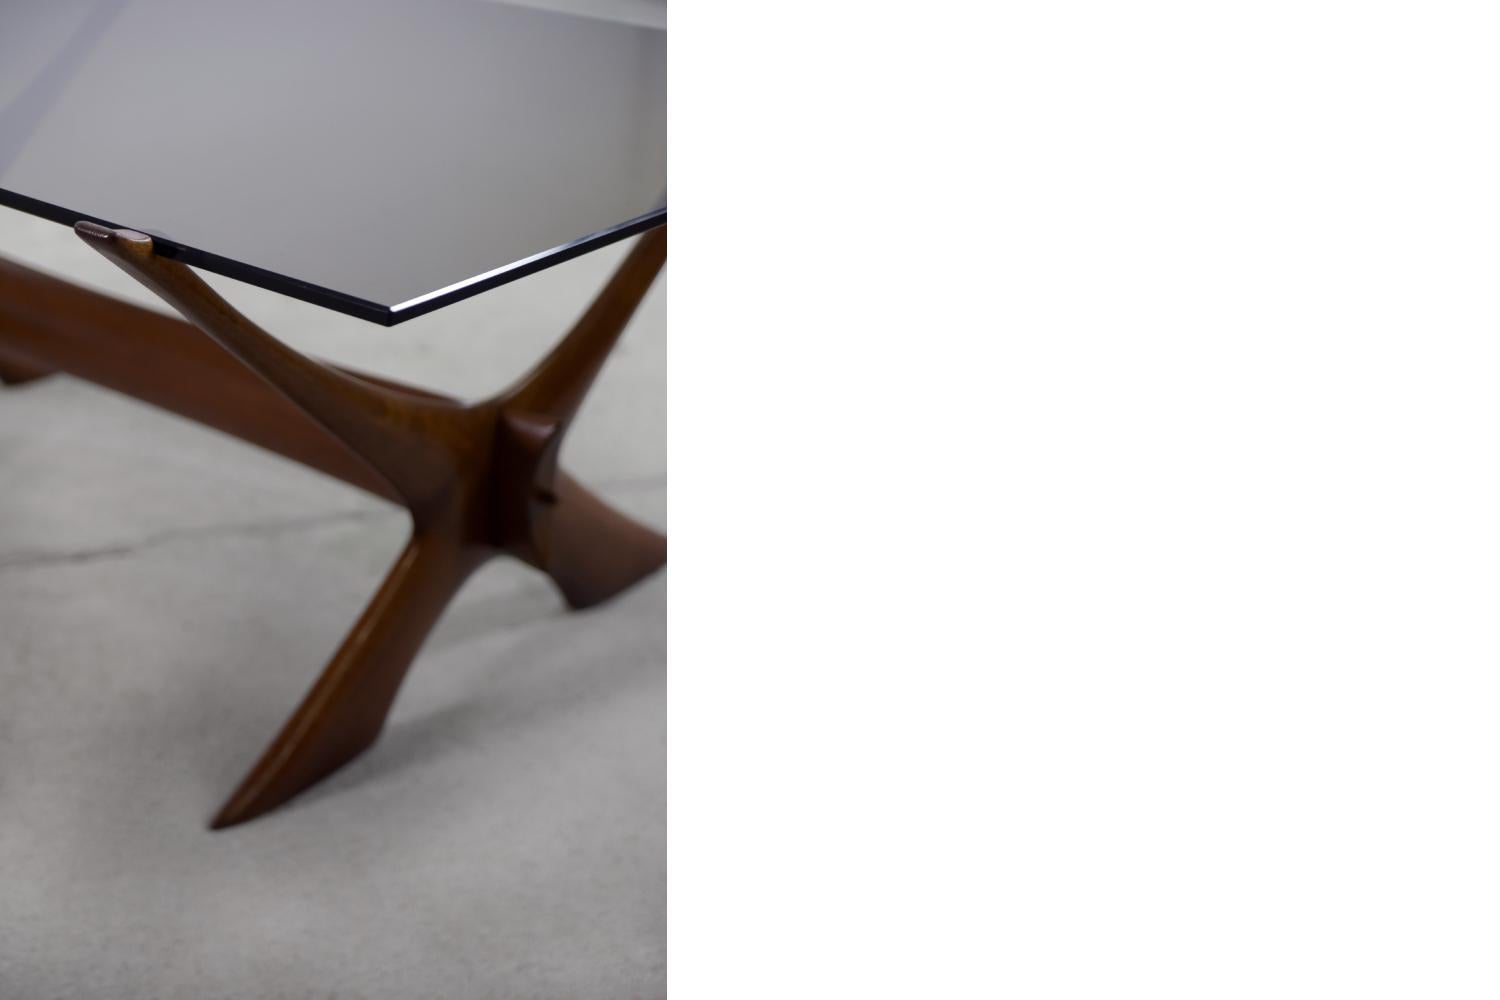 Vintage Mid-Century Modern Walnut Wood Condor Coffee Table from Örebro Glass In Good Condition For Sale In Warszawa, Mazowieckie